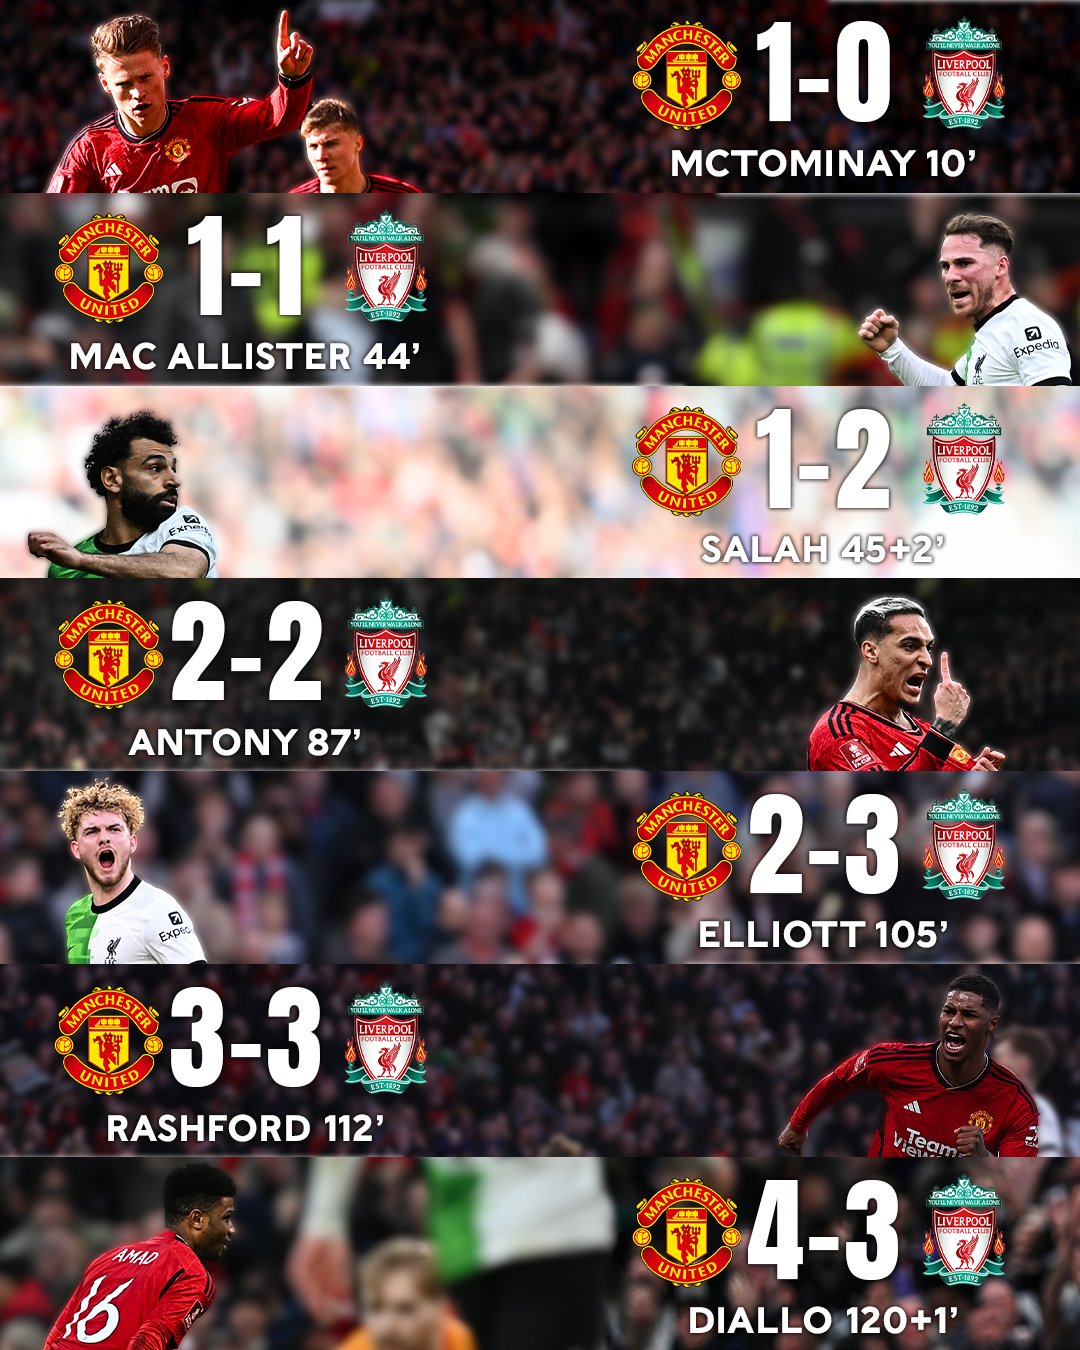 Manchester United 1-0 Liverpool: McTominay 10'
Manchester United 1-1 Liverpool: Mac Allister 44'
Manchester United 1-2 Liverpool: Salah 45+2'
Manchester United 2-2 Liverpool: Antony 87'
Manchester United 2-3 Liverpool: Elliott 105'
Manchester United 3-3 Liverpool: Rashford 112'
Manchester United 4-3 Liverpool: Diallo 120+1'